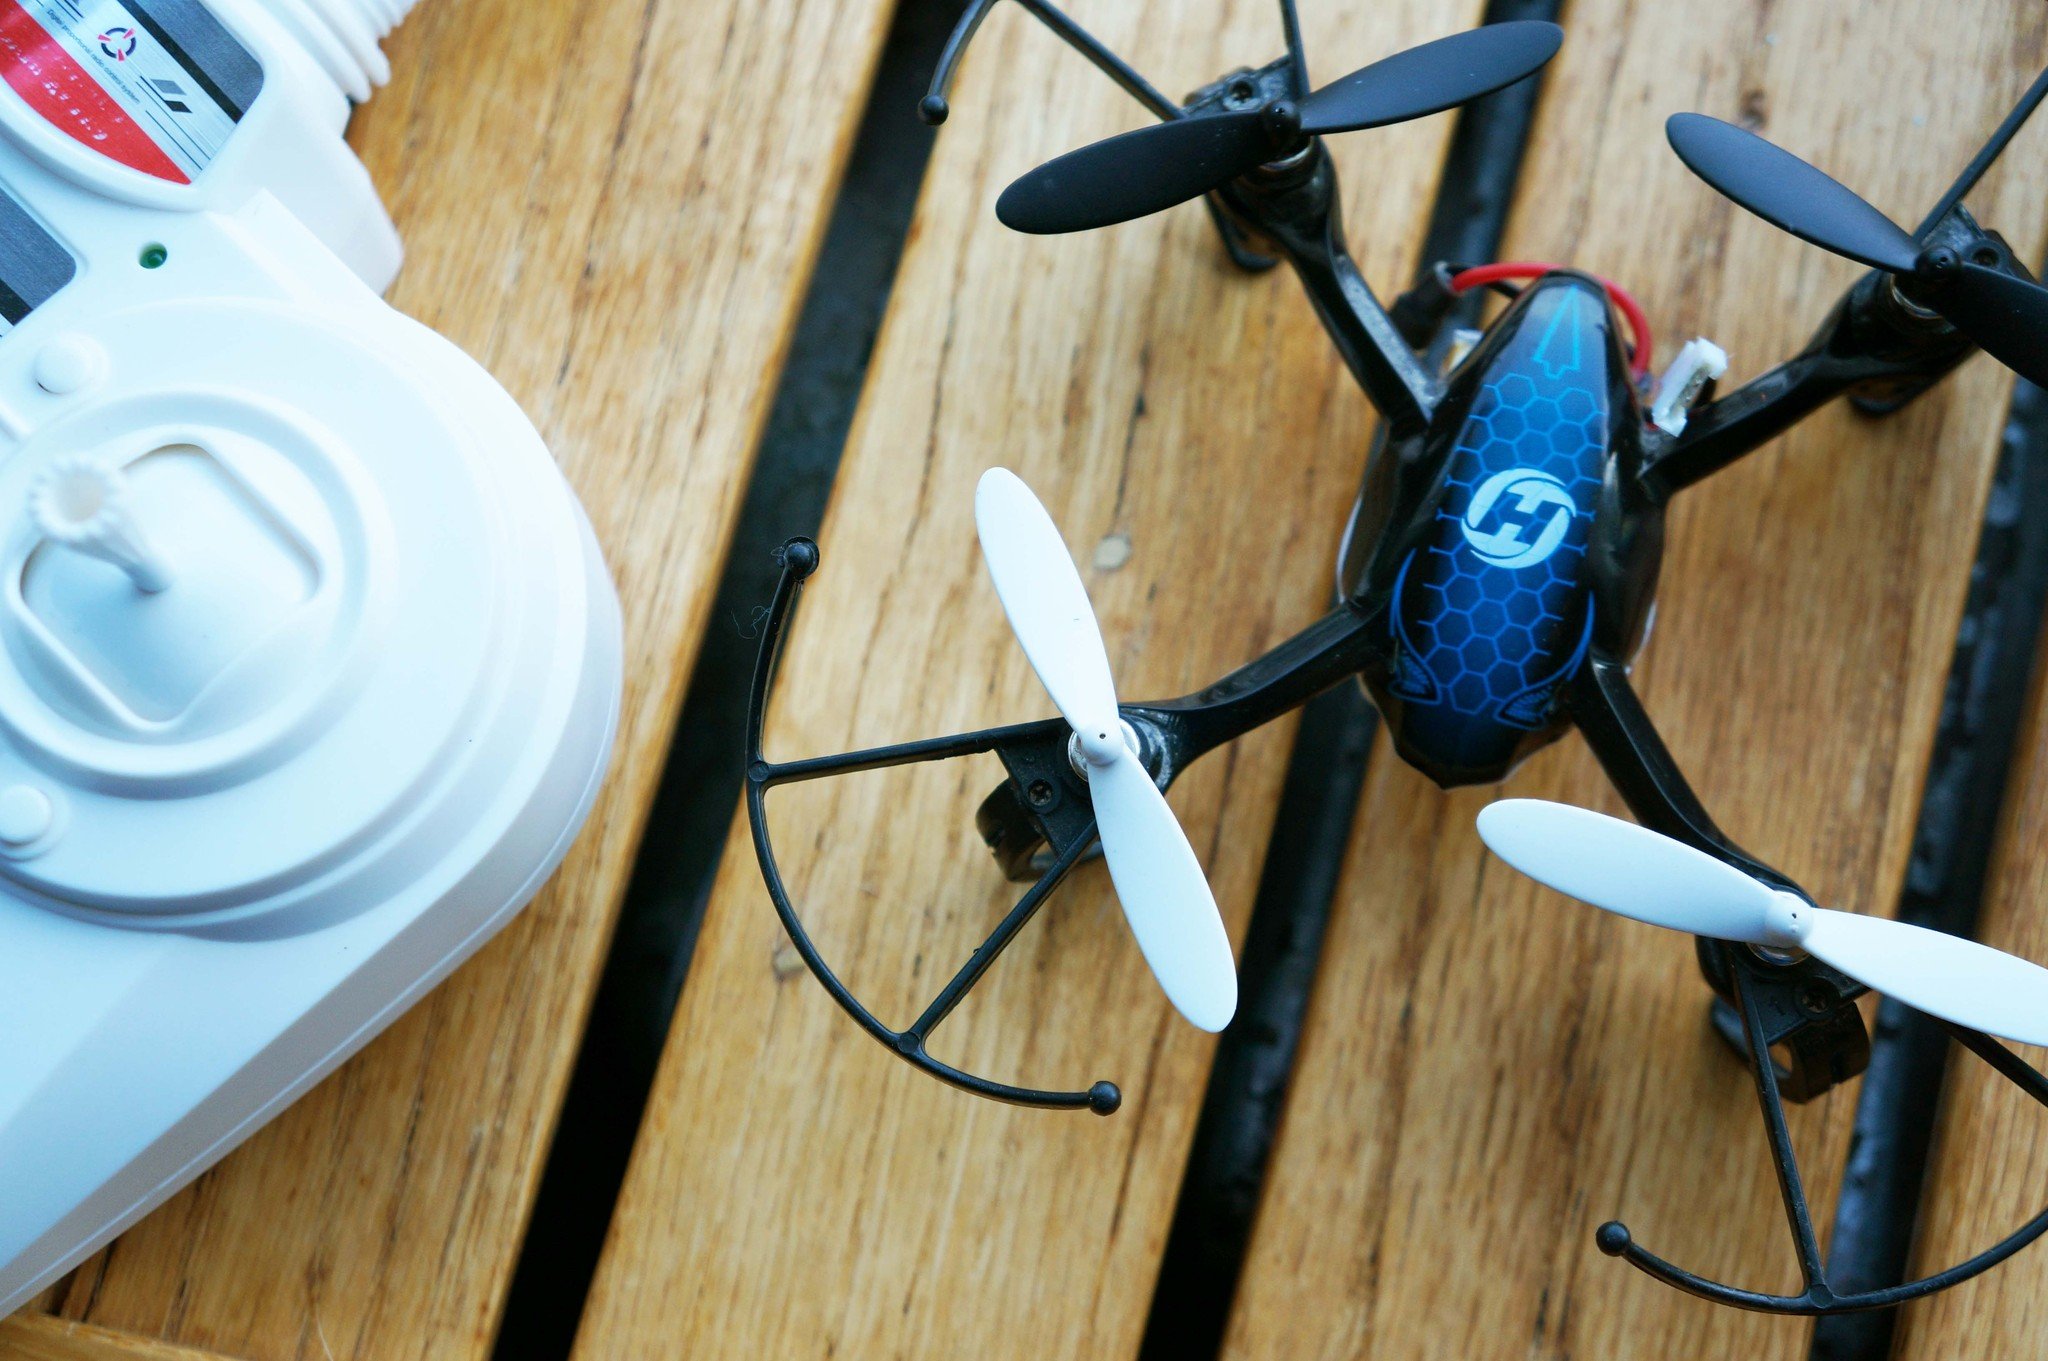 Potensic A20 Mini Drone review: a tiny toy drone for young pilots